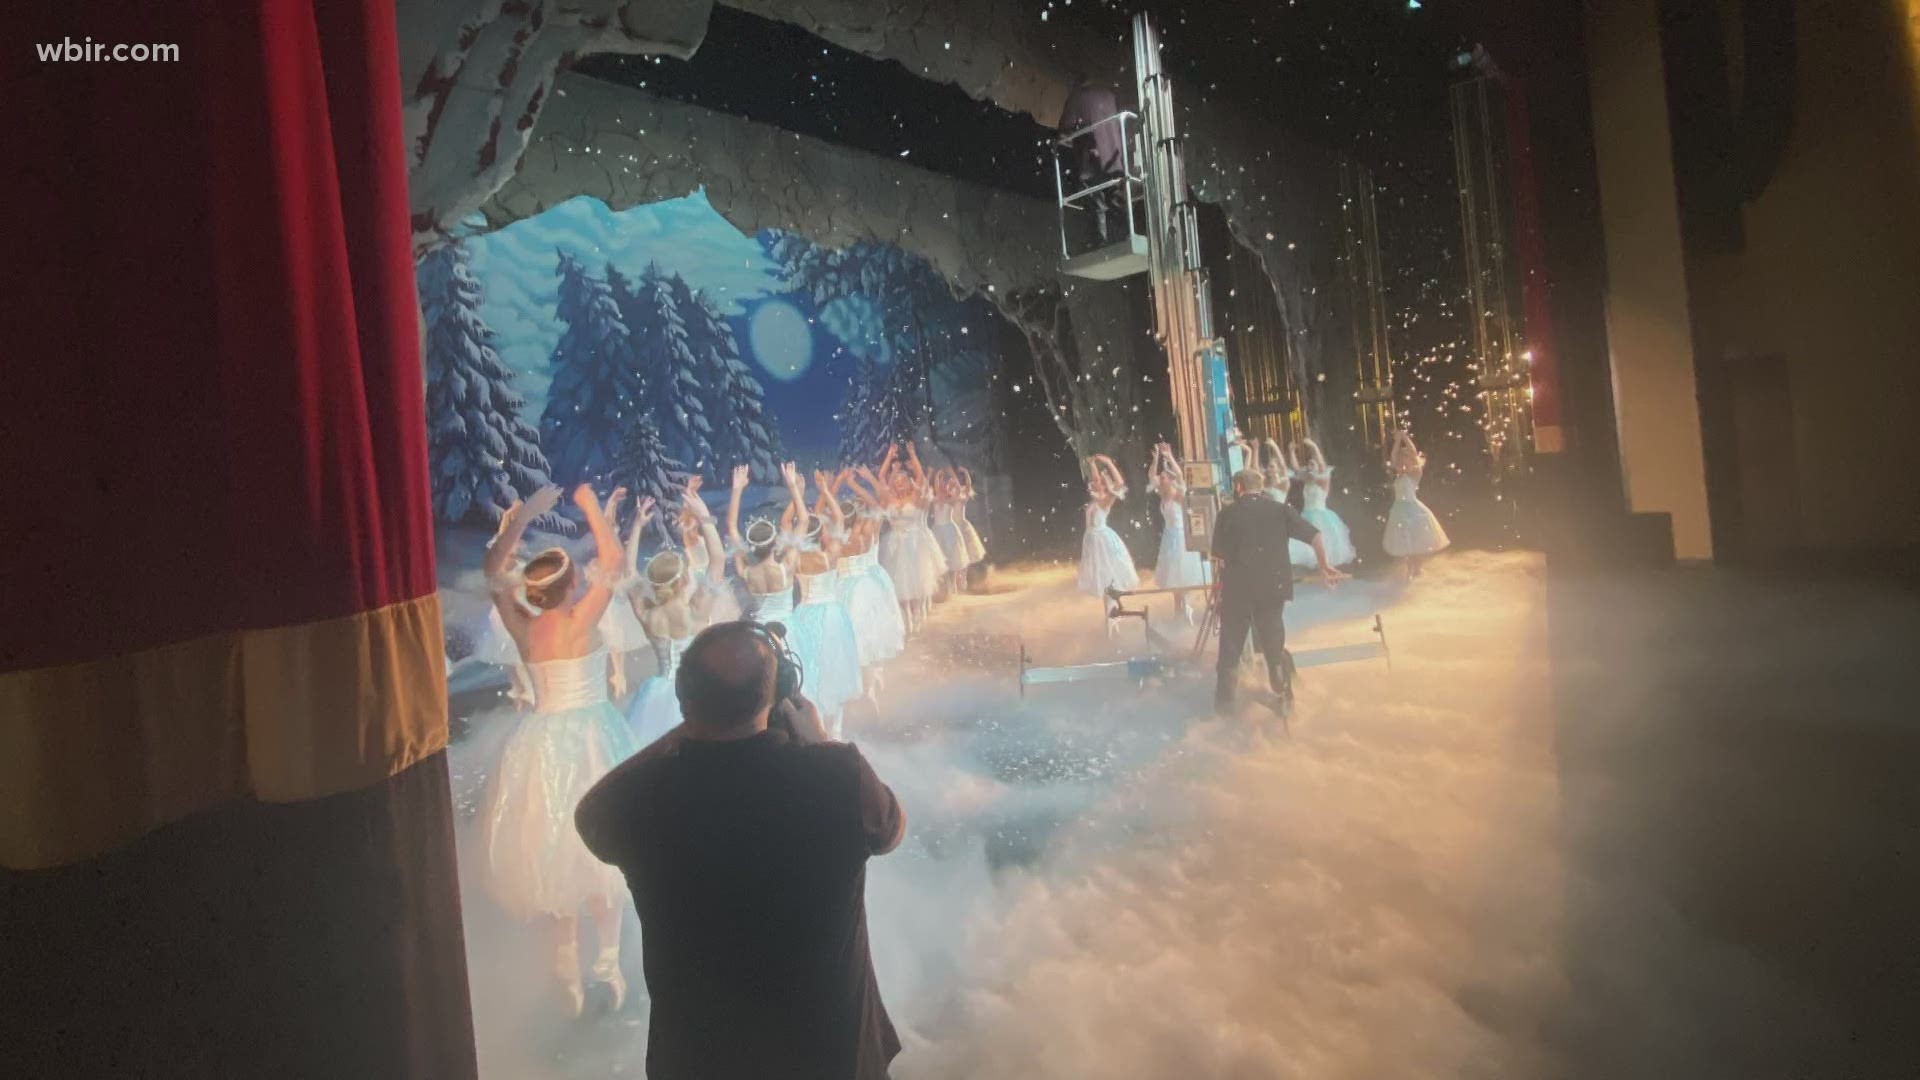 Dancers replaced the audience with a film crew for their recent performance of The Nutcracker